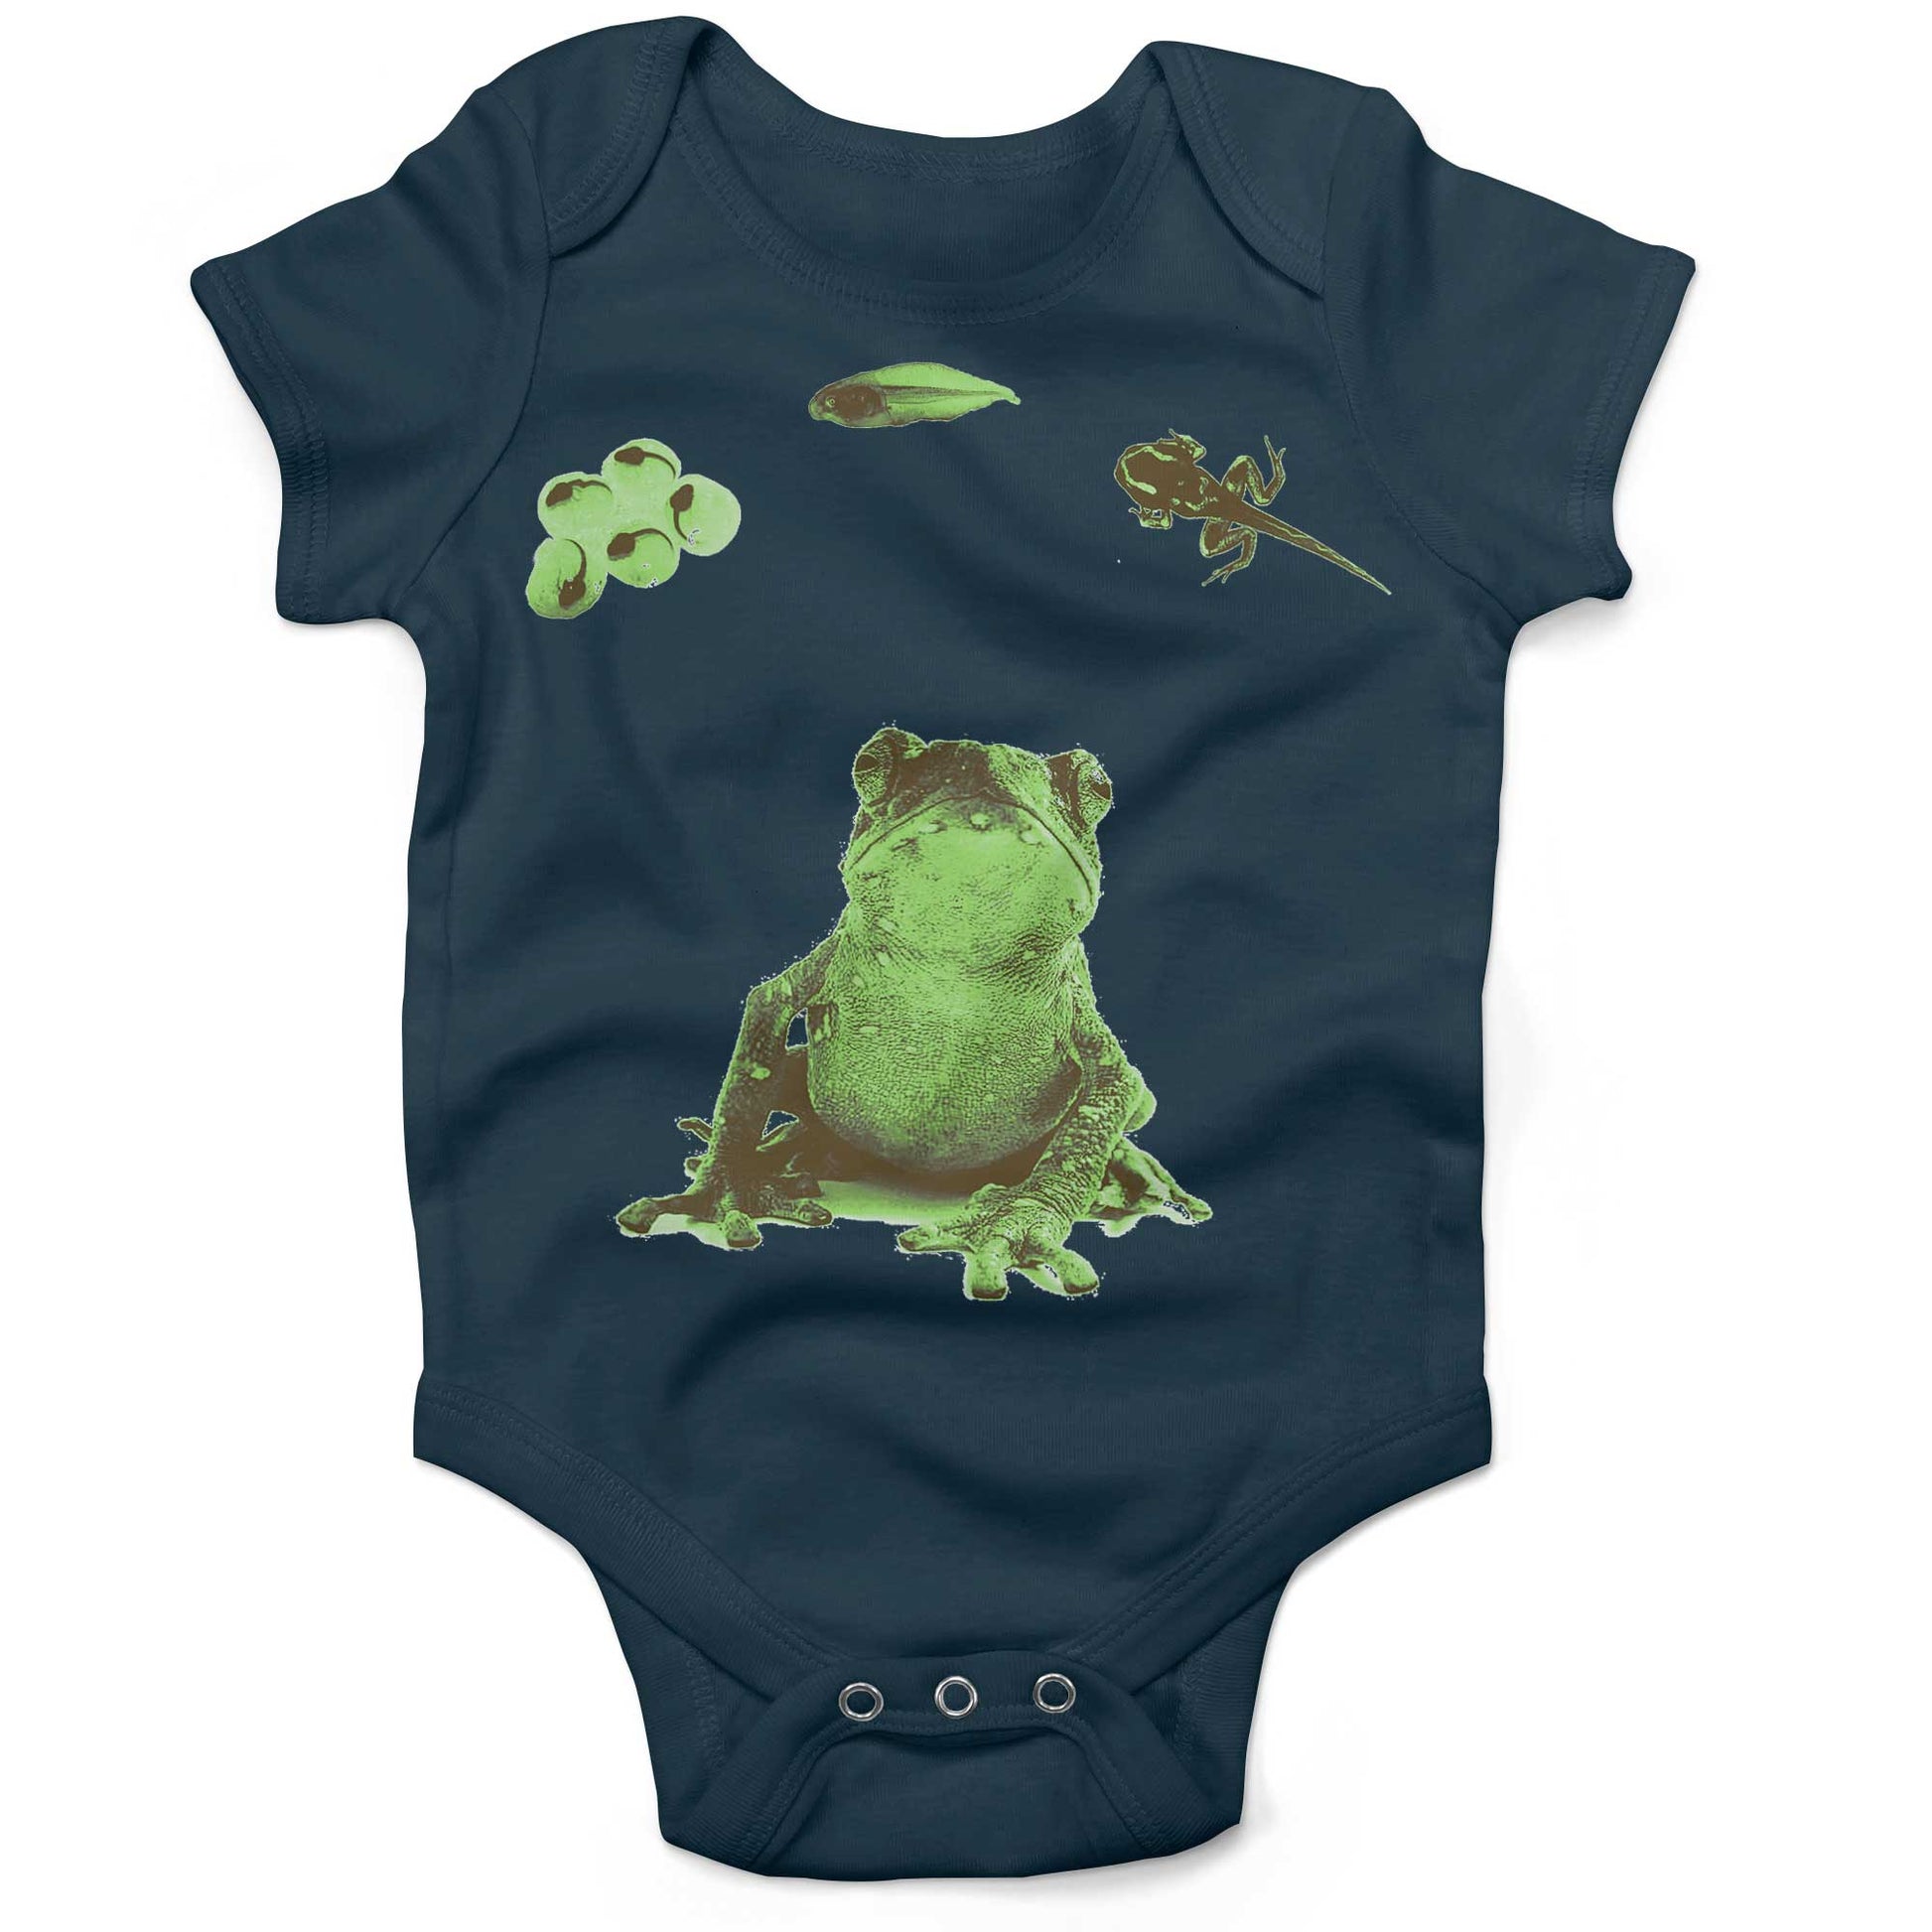 Frog Lifecycle Infant Bodysuit or Raglan Baby Tee-Organic Pacific Blue-3-6 months